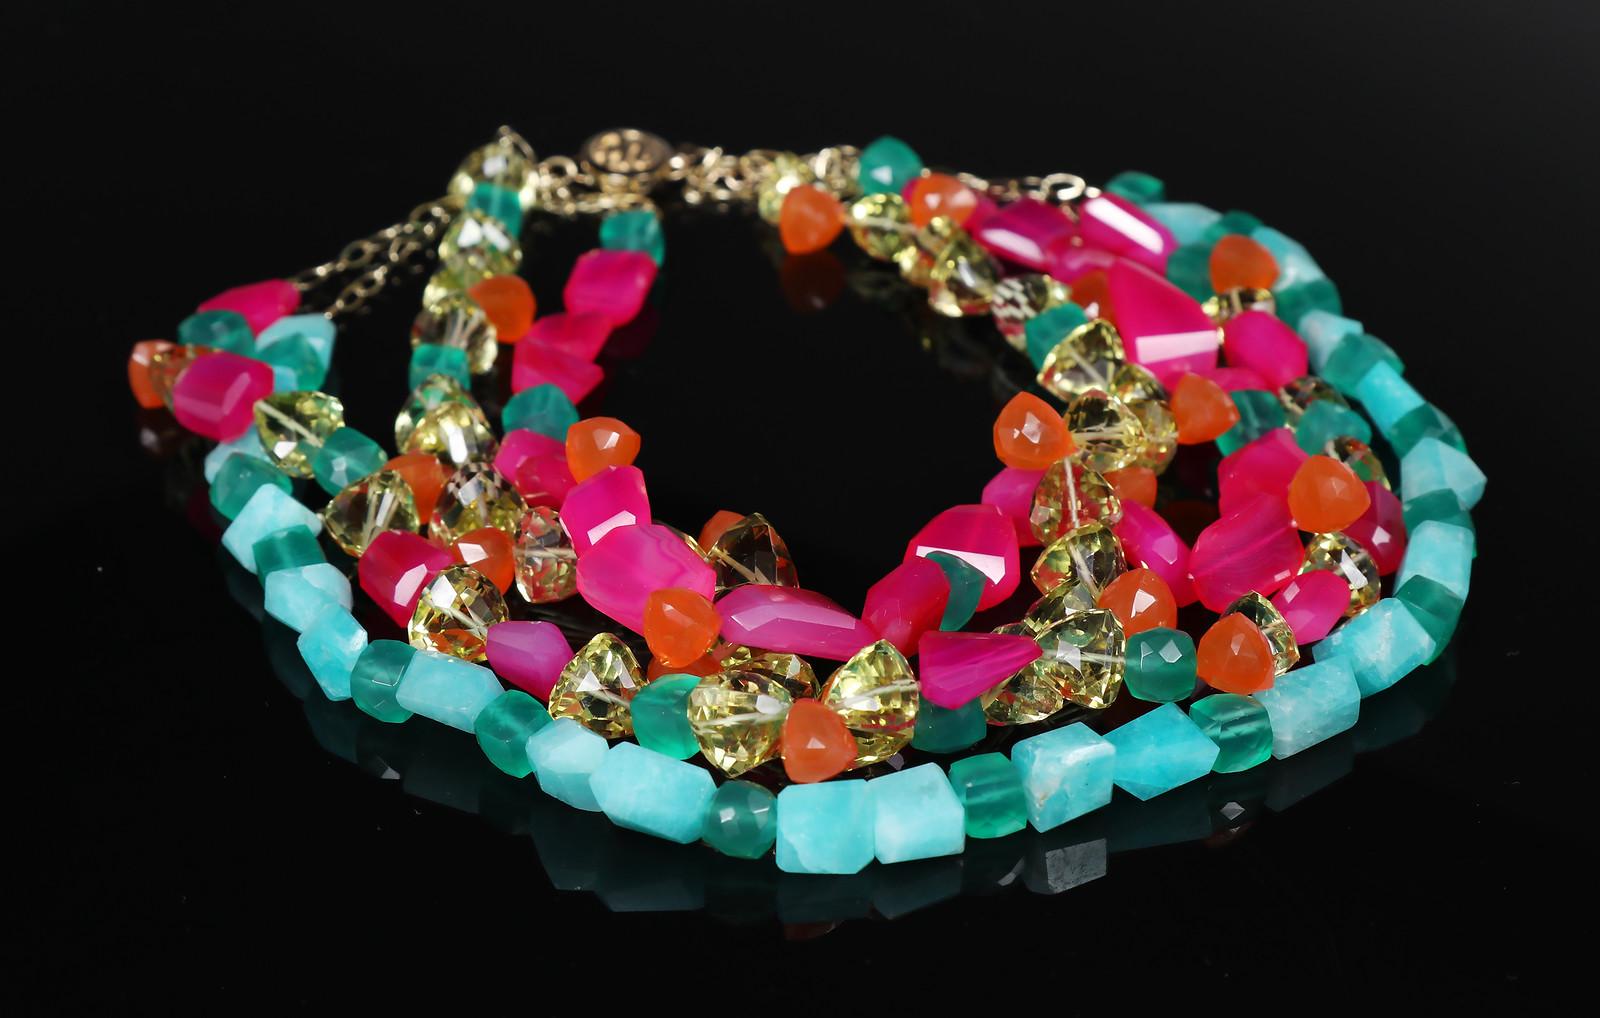 A necklace of carnelian, amazonite, chalcedony, quartz, and gold reflects the fun of tropical vacations, colorful sundresses, and breezy nights.  Wherever you explore, 